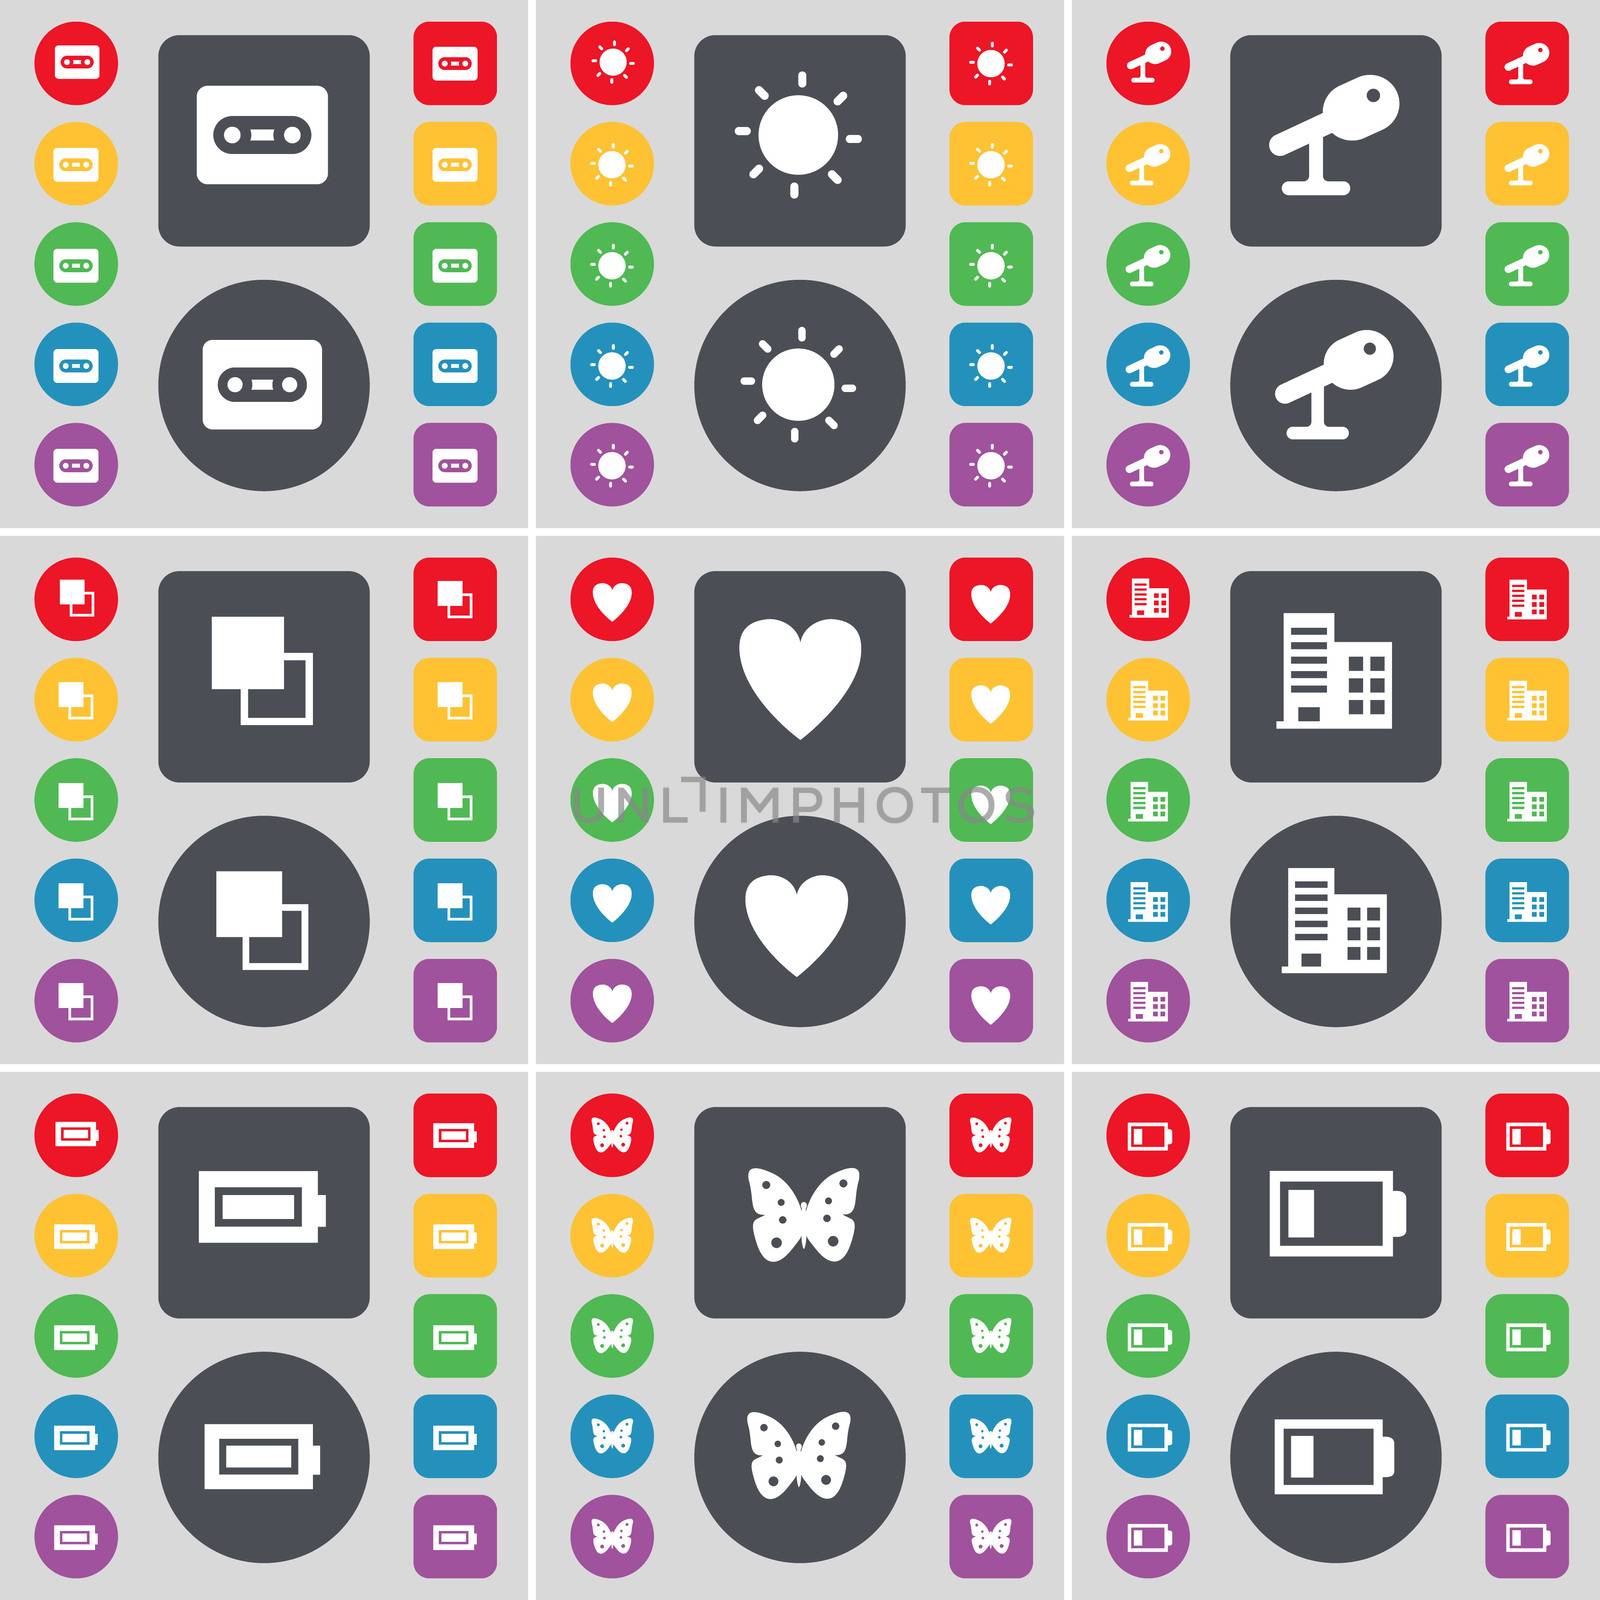 Cassette, Light, Microphone, Copy, Heart, Building, Battery, Butterfly icon symbol. A large set of flat, colored buttons for your design. illustration